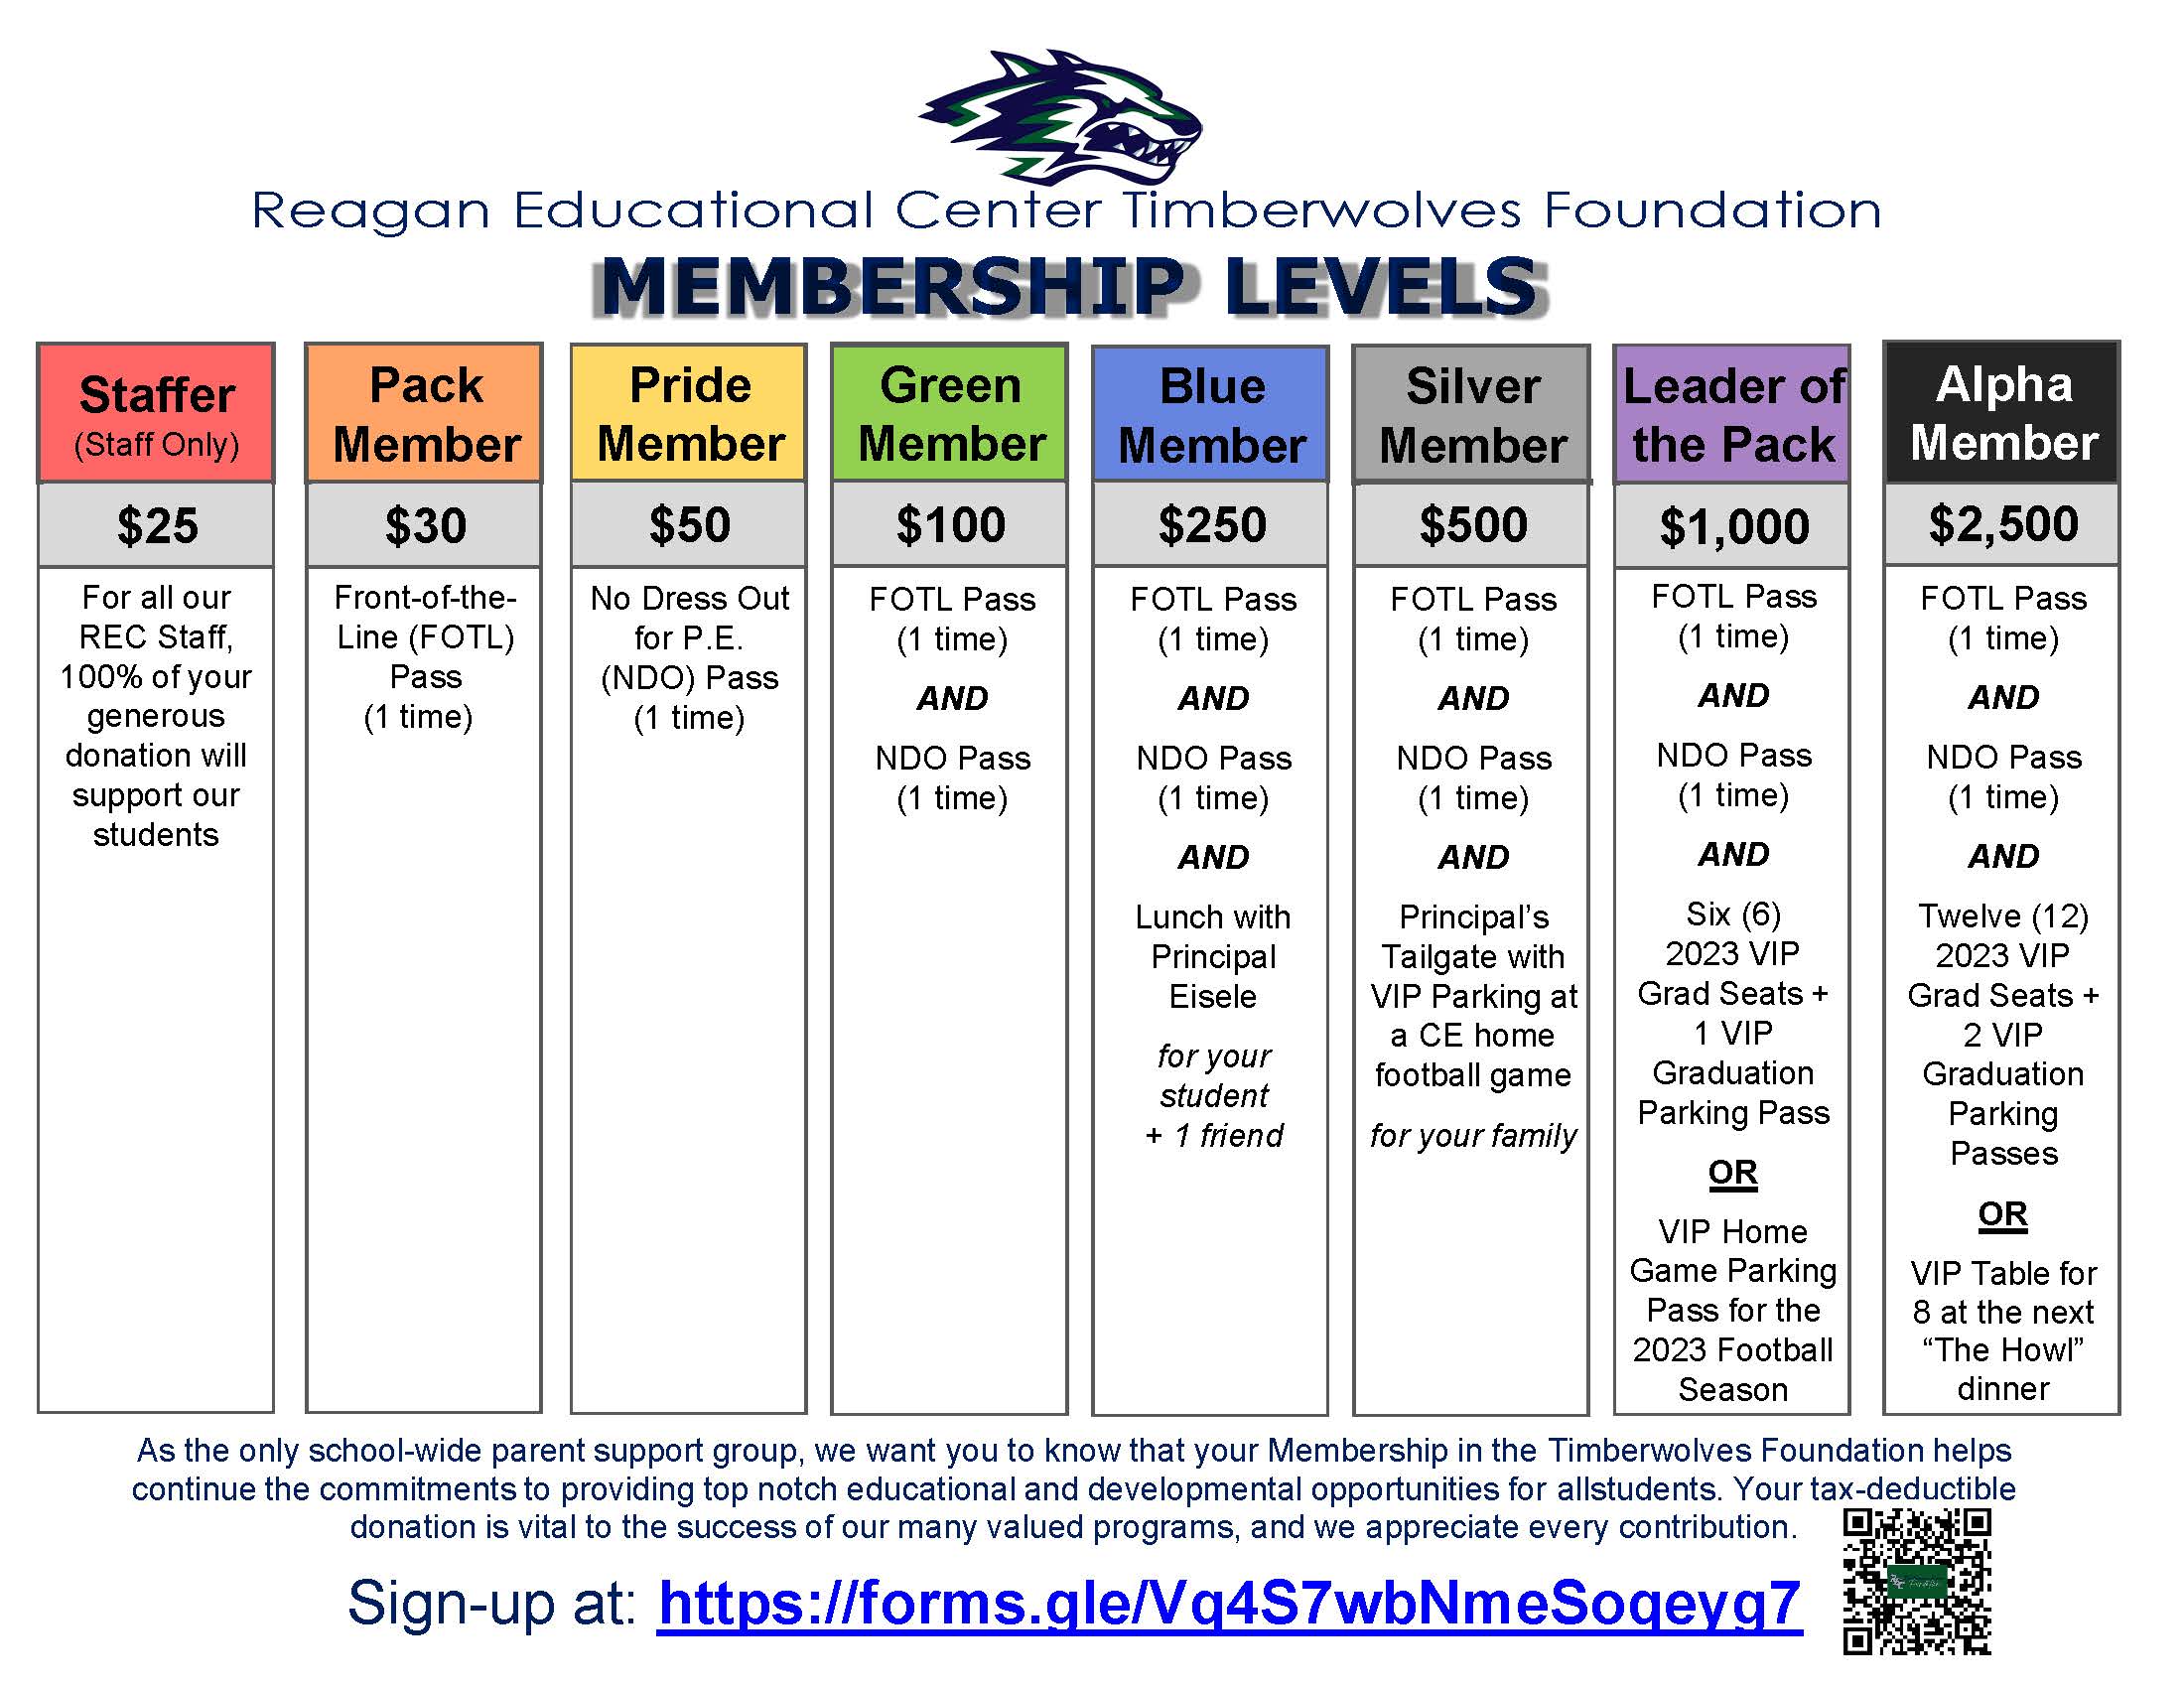 Become a Member Membership Levels